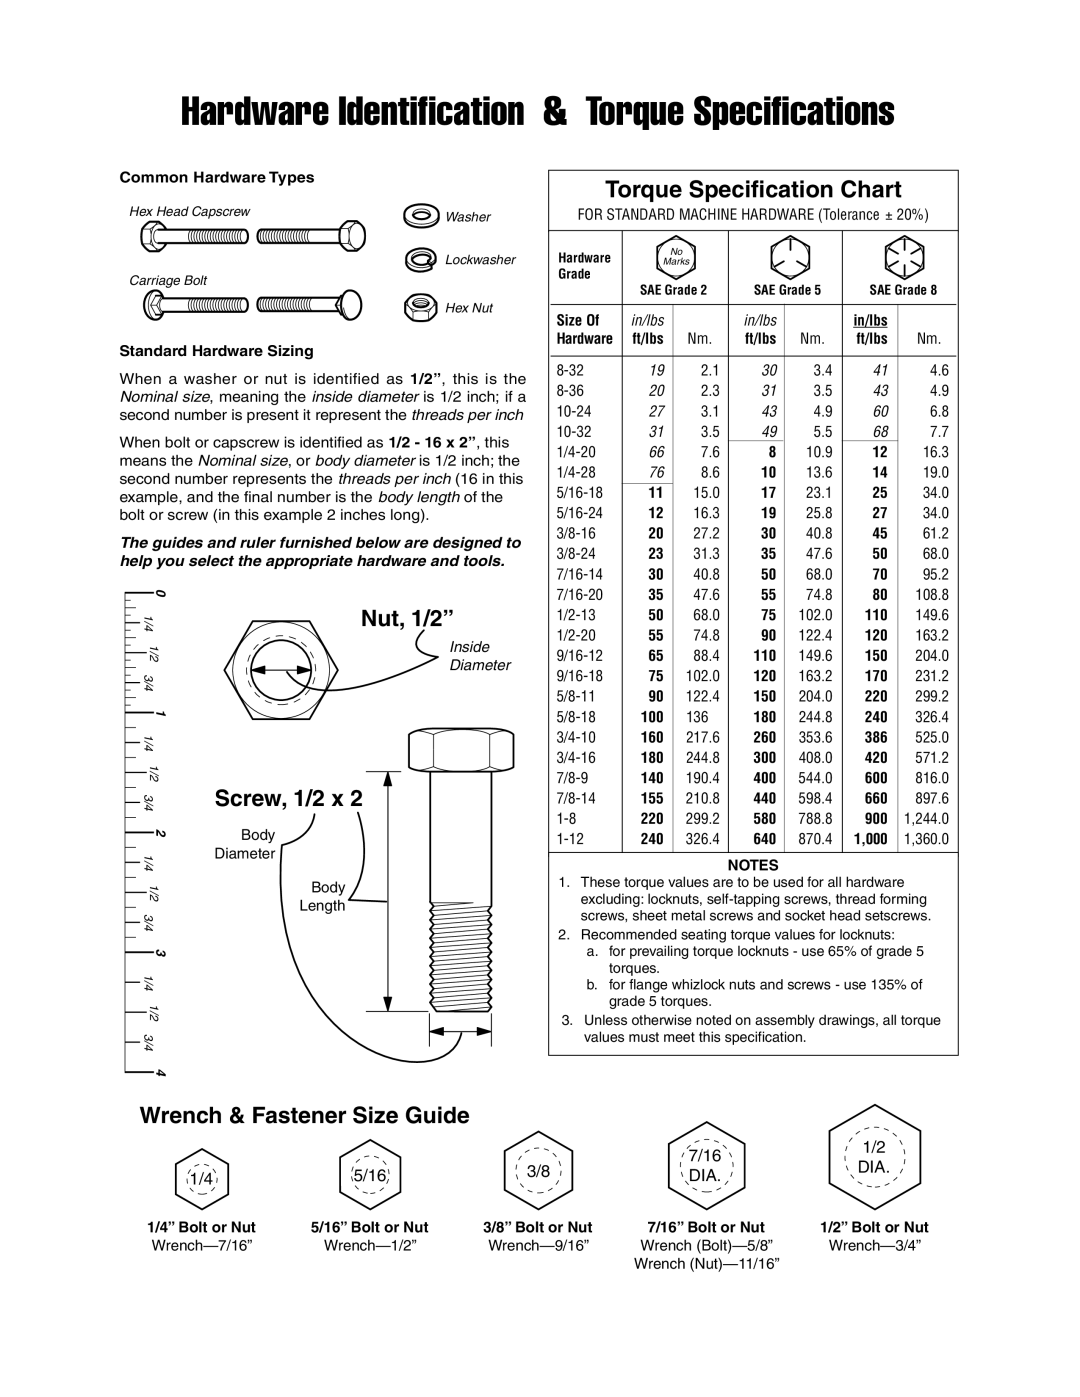 Snapper 4573 Wrench & Fastener Size Guide, Common Hardware Types, Standard Hardware Sizing, 1/4” Bolt or Nut, Nut, 1/2” 